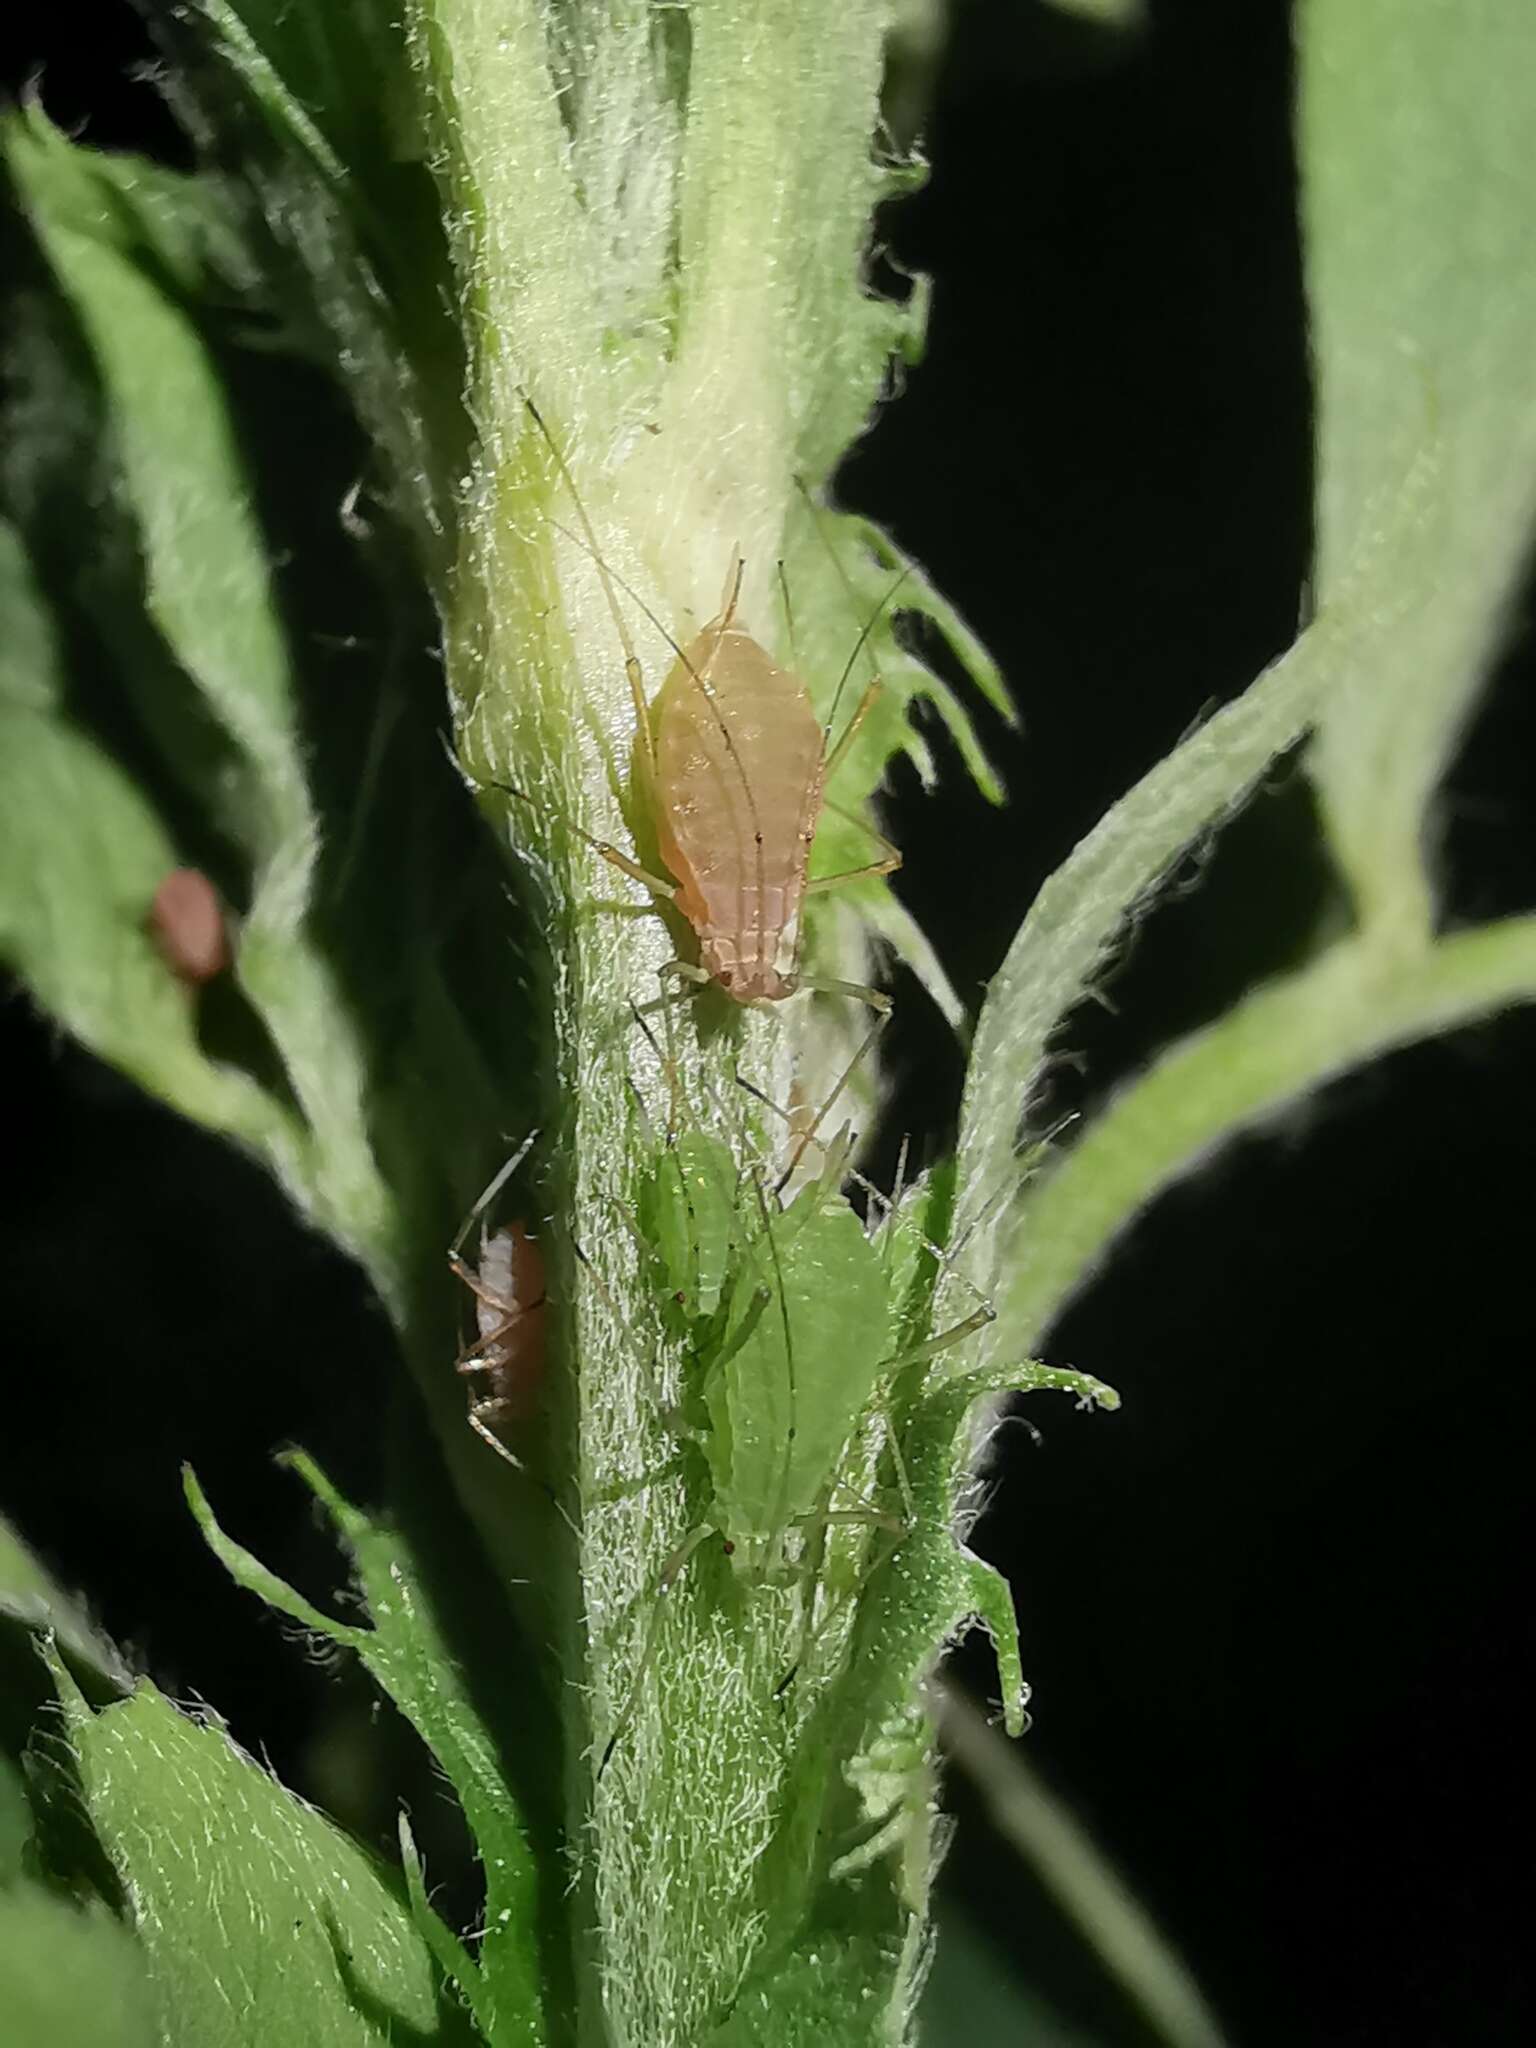 Image of pea aphid